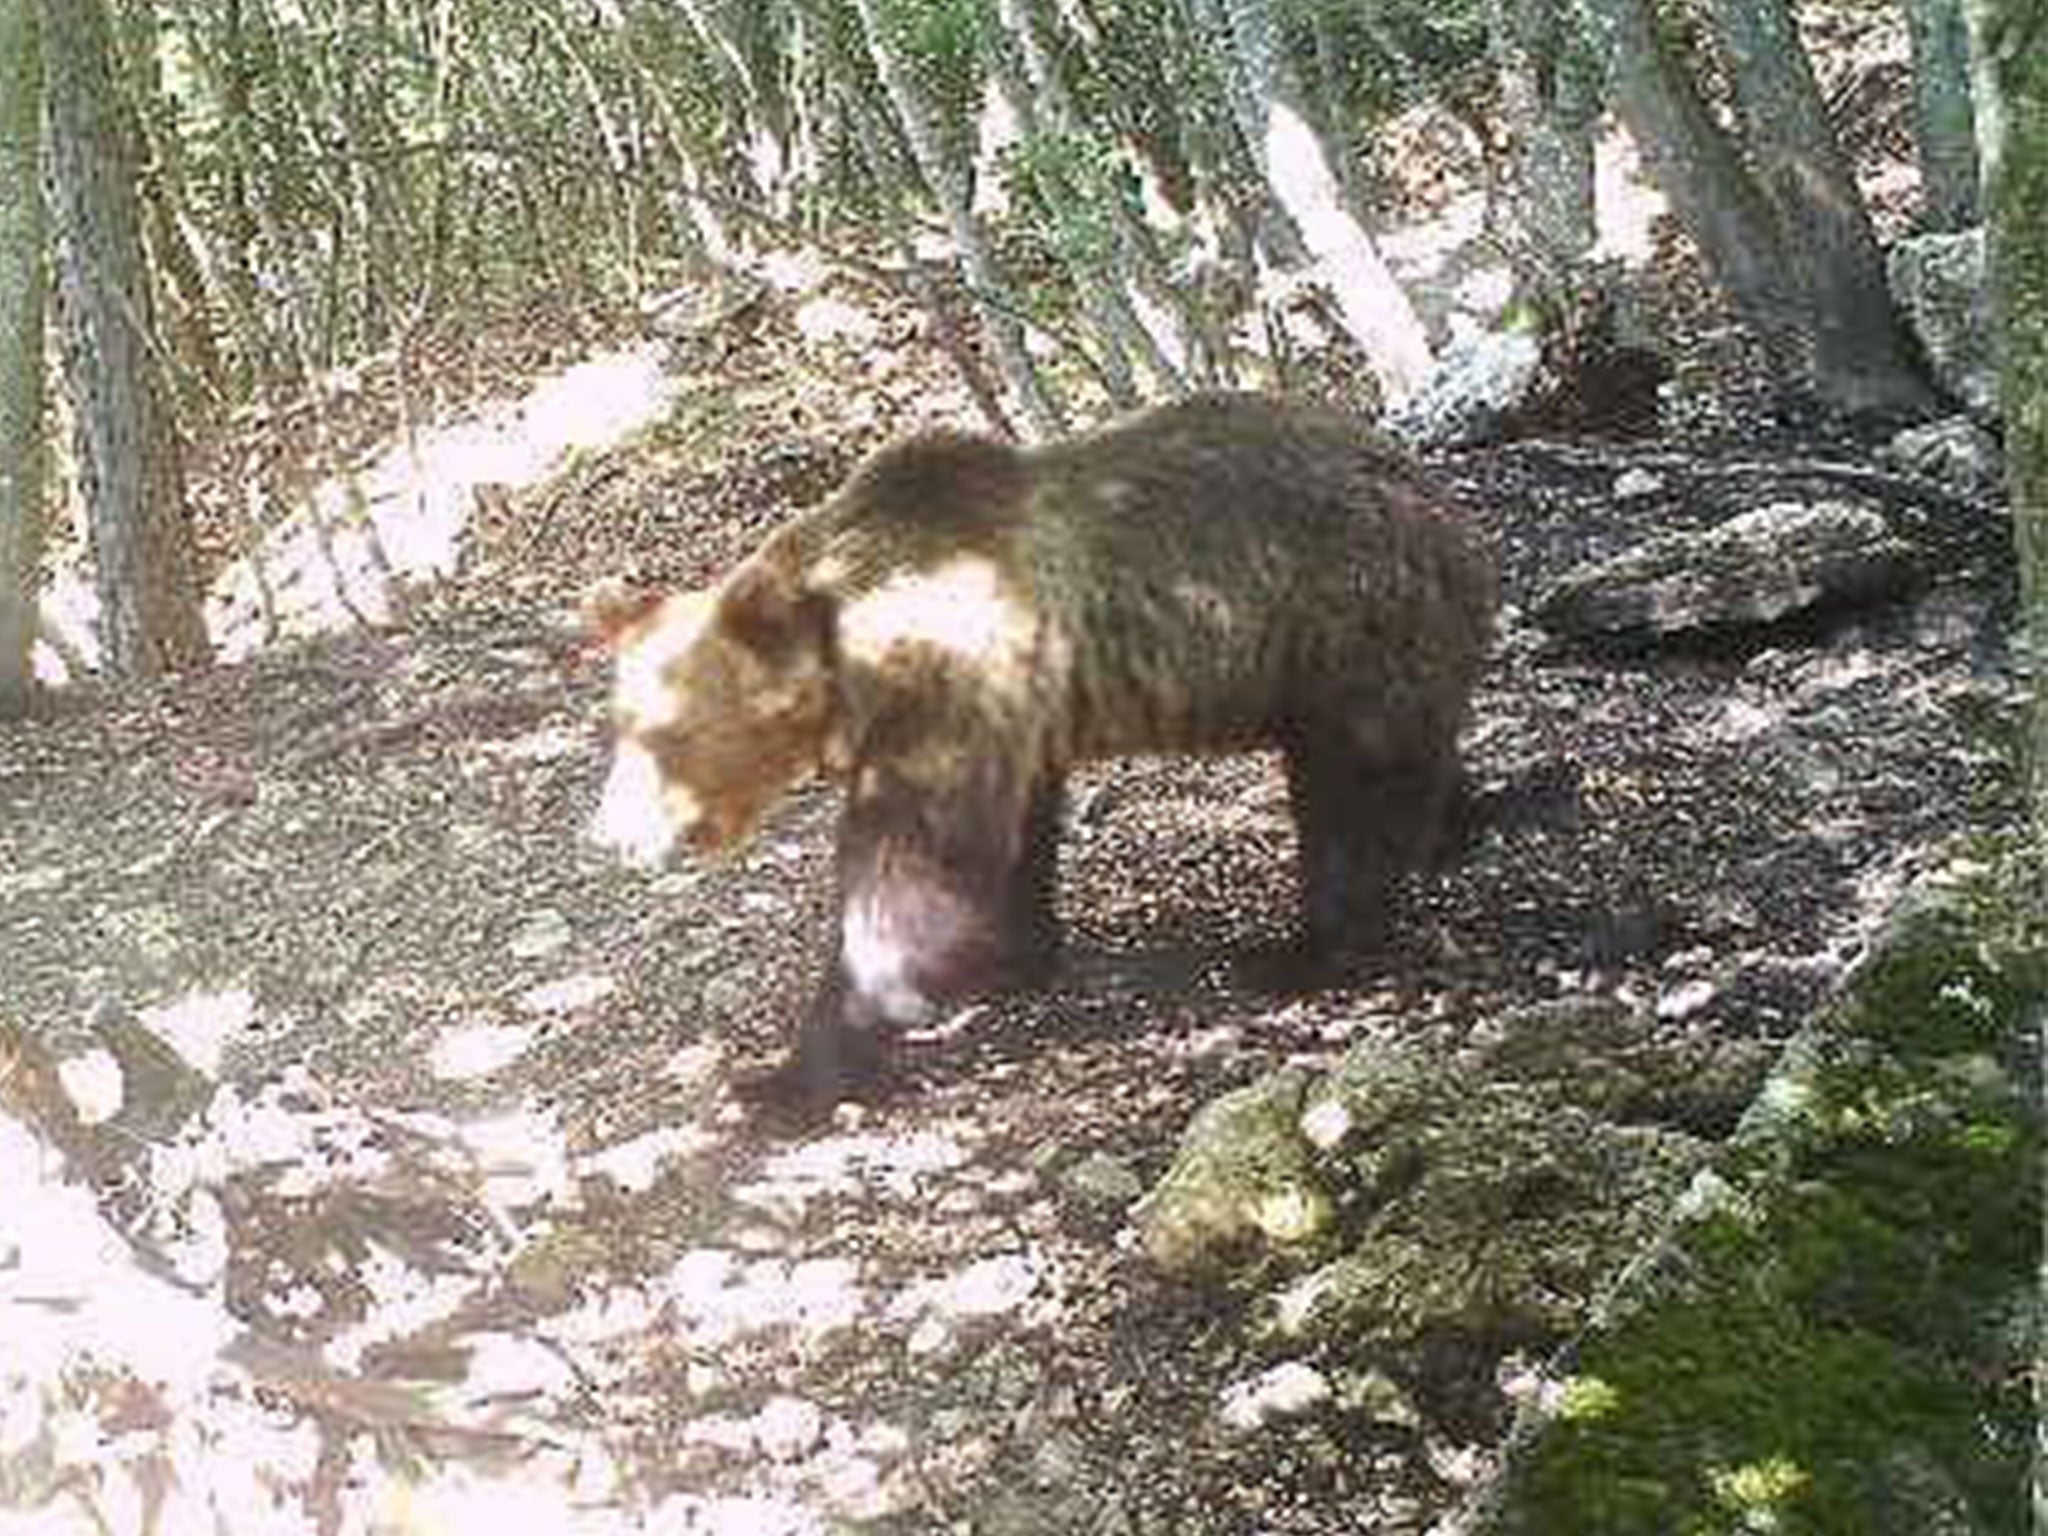 A brown bear in Trento